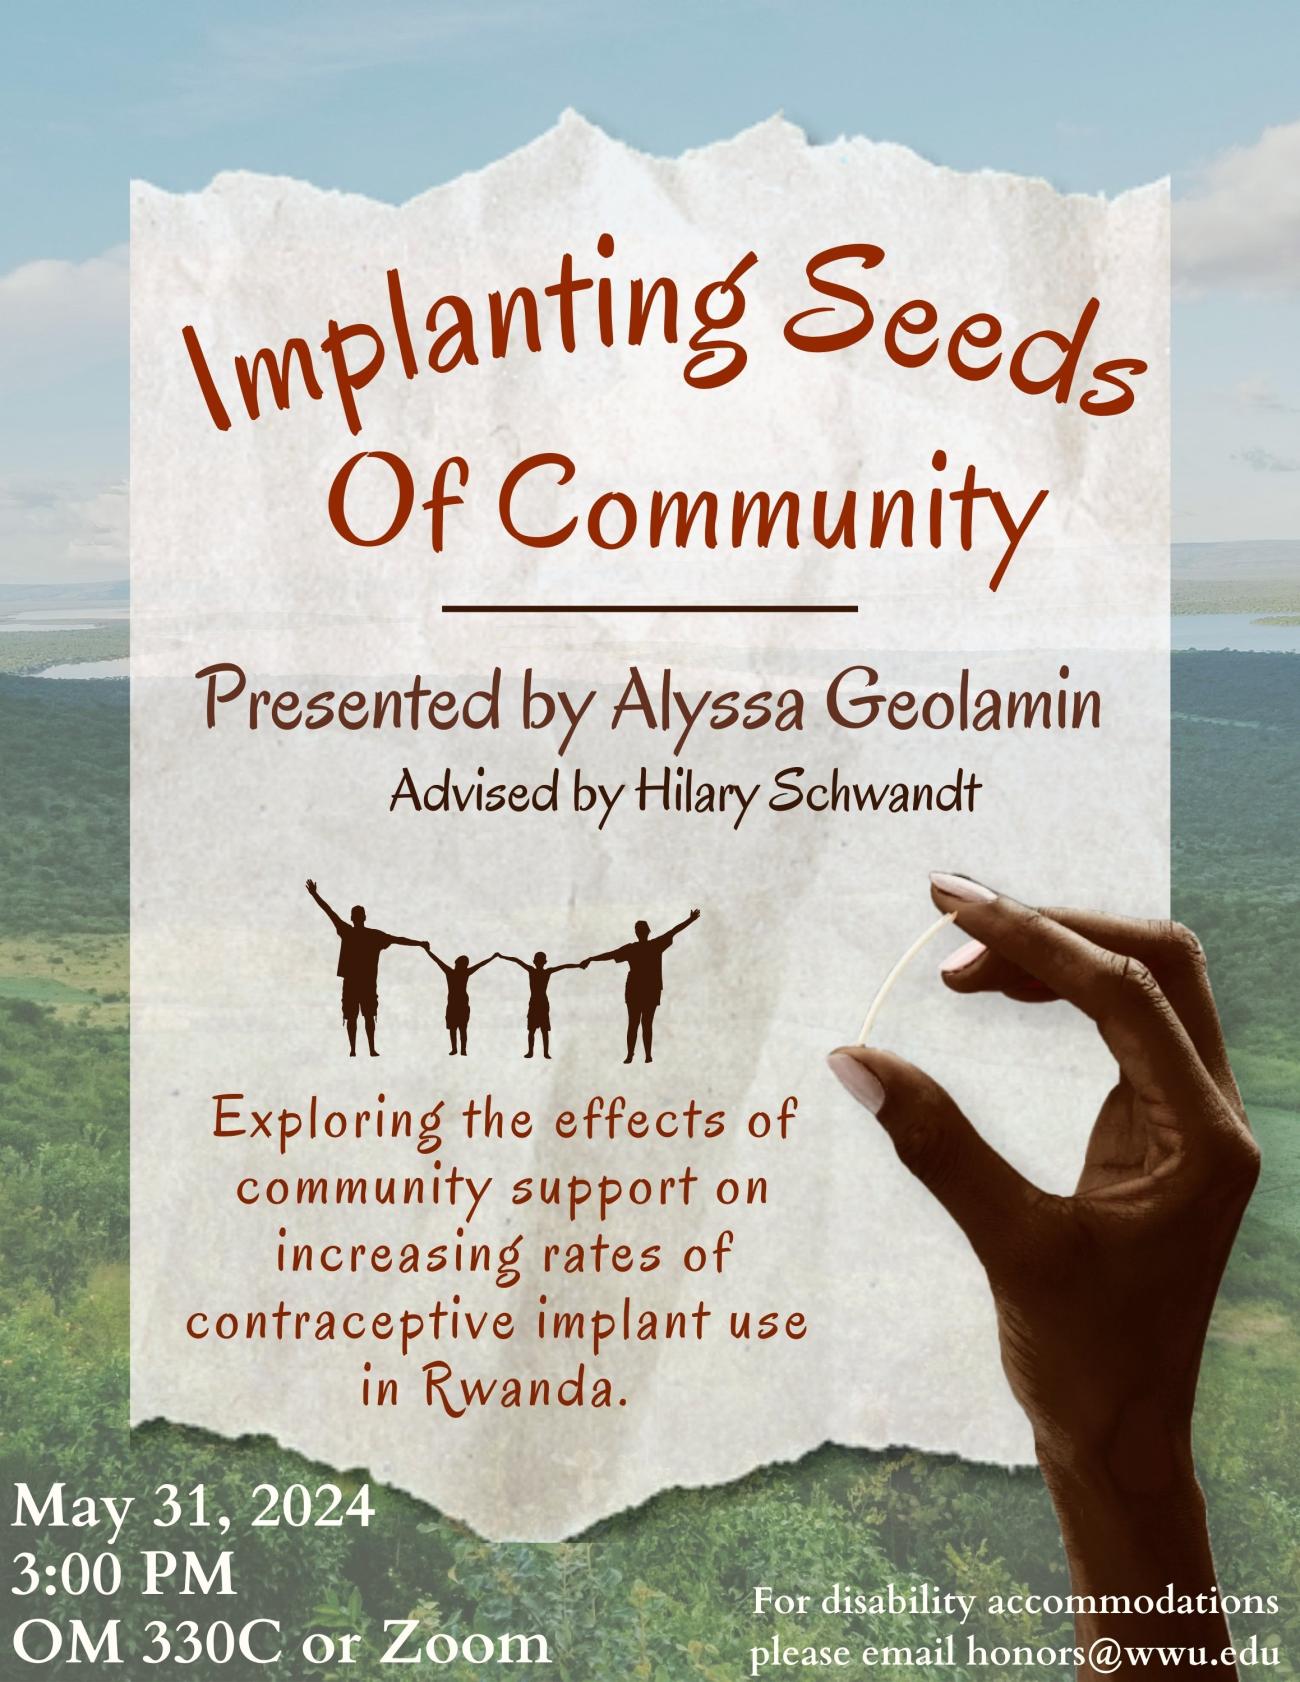 Ripped paper on top of background showing Rwanda forest landscape. Small illustration on paper of a four-person family. Photo of hand holding contraceptive implant on bottom right corner. Text on paper reads "Implanting Seeds of Community. Presented by Alyssa Geolamin. Advised by Hilary Schwandt. Exploring the effects of community support on increasing rates of contraceptive implant use in Rwanda. May 31, 2024. 3:00 PM. OM 330C or Zoom. For disability accommodations please email honors@wwu.edu."